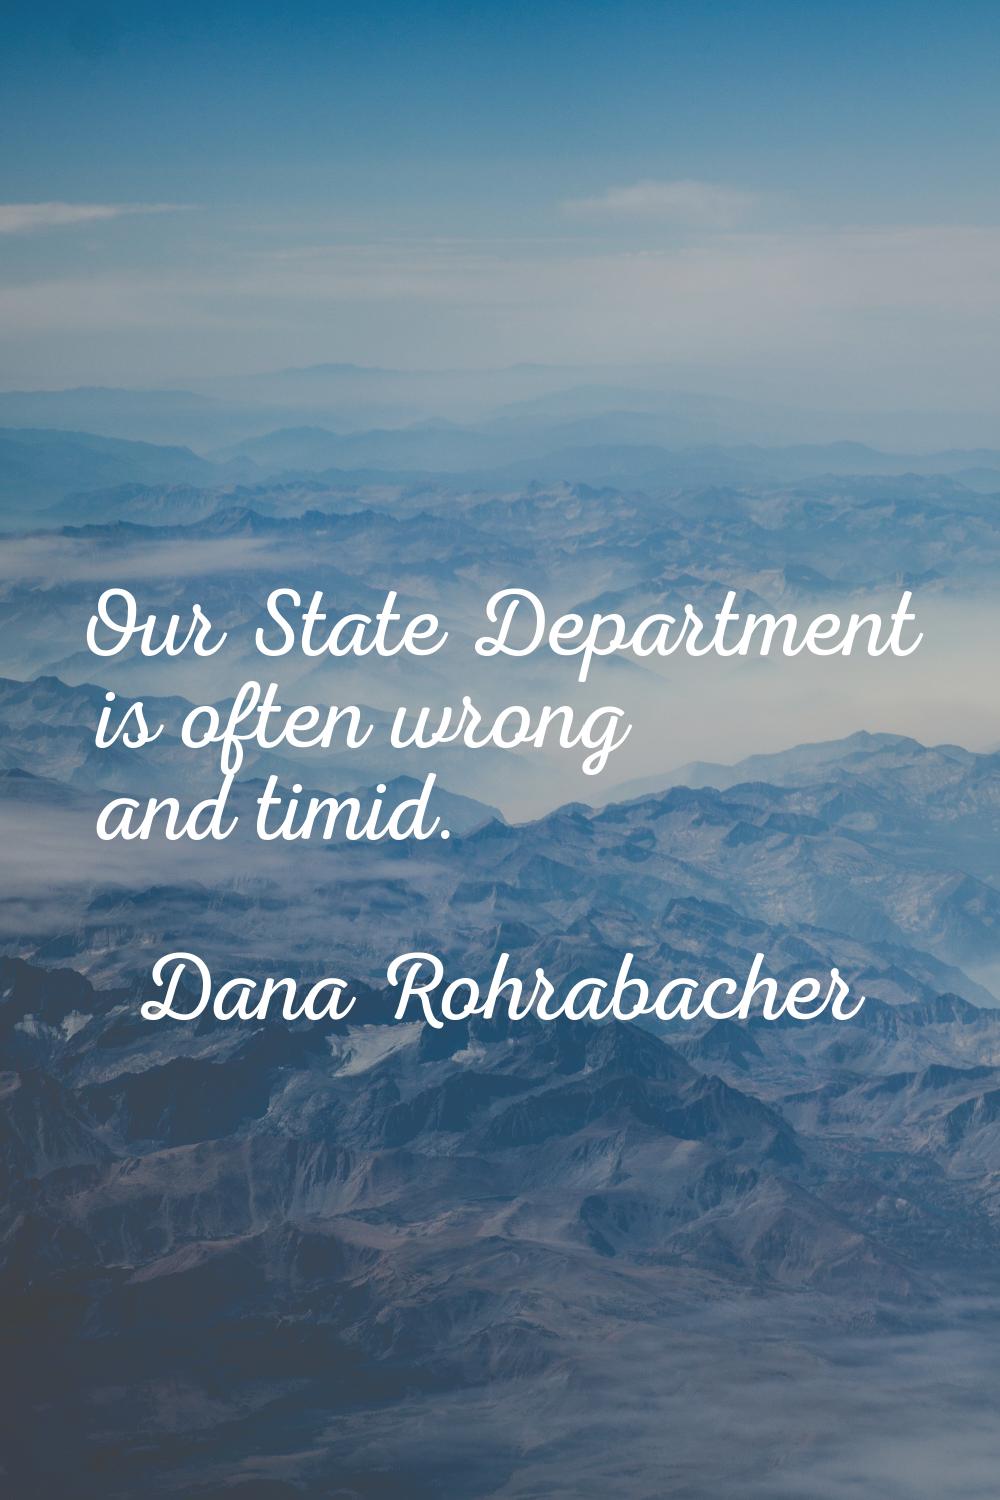 Our State Department is often wrong and timid.